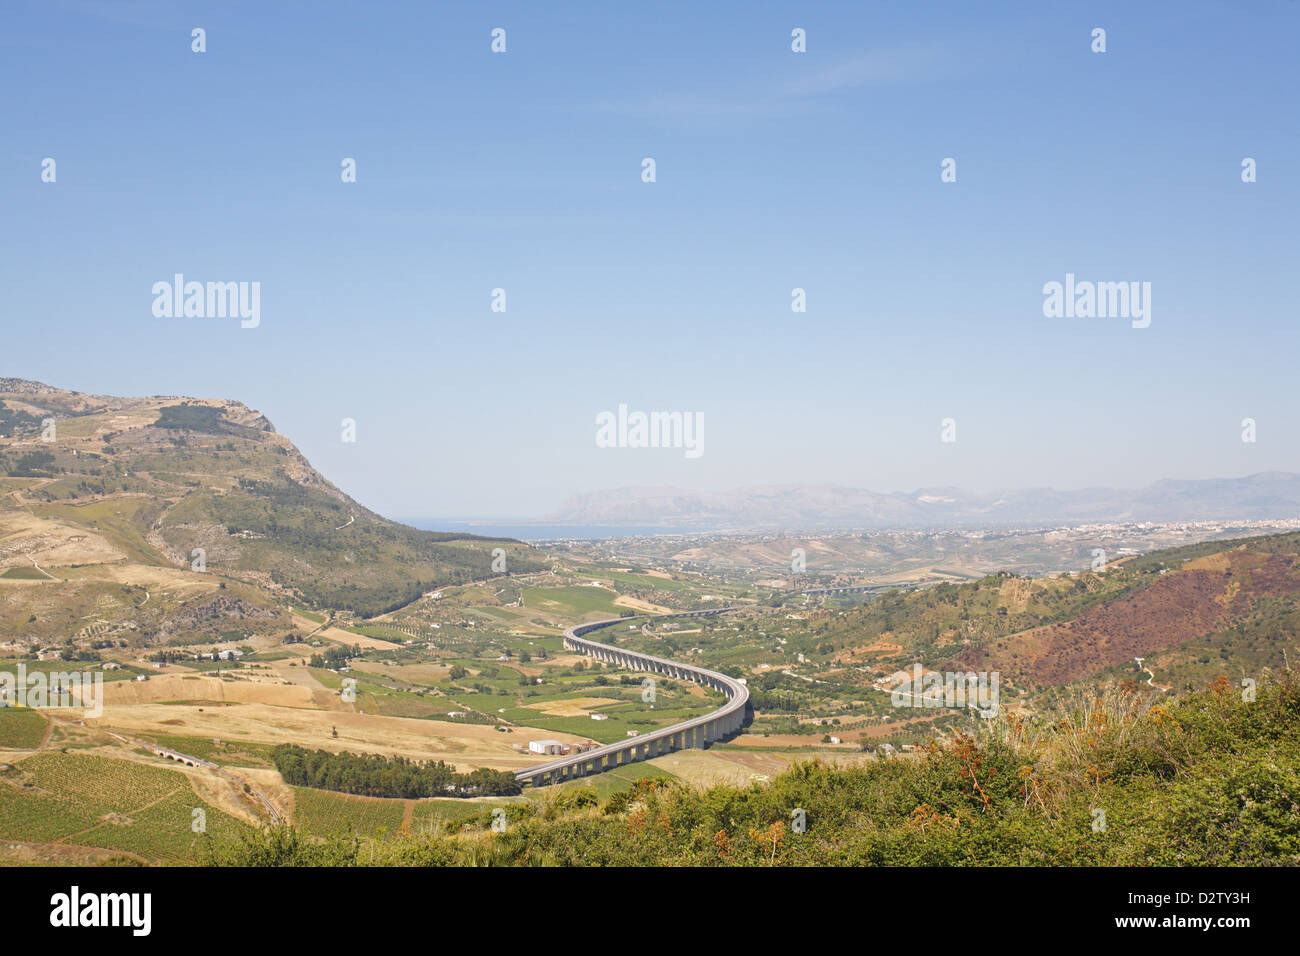 Sicilian landscape, view from Segesta, Italy Stock Photo